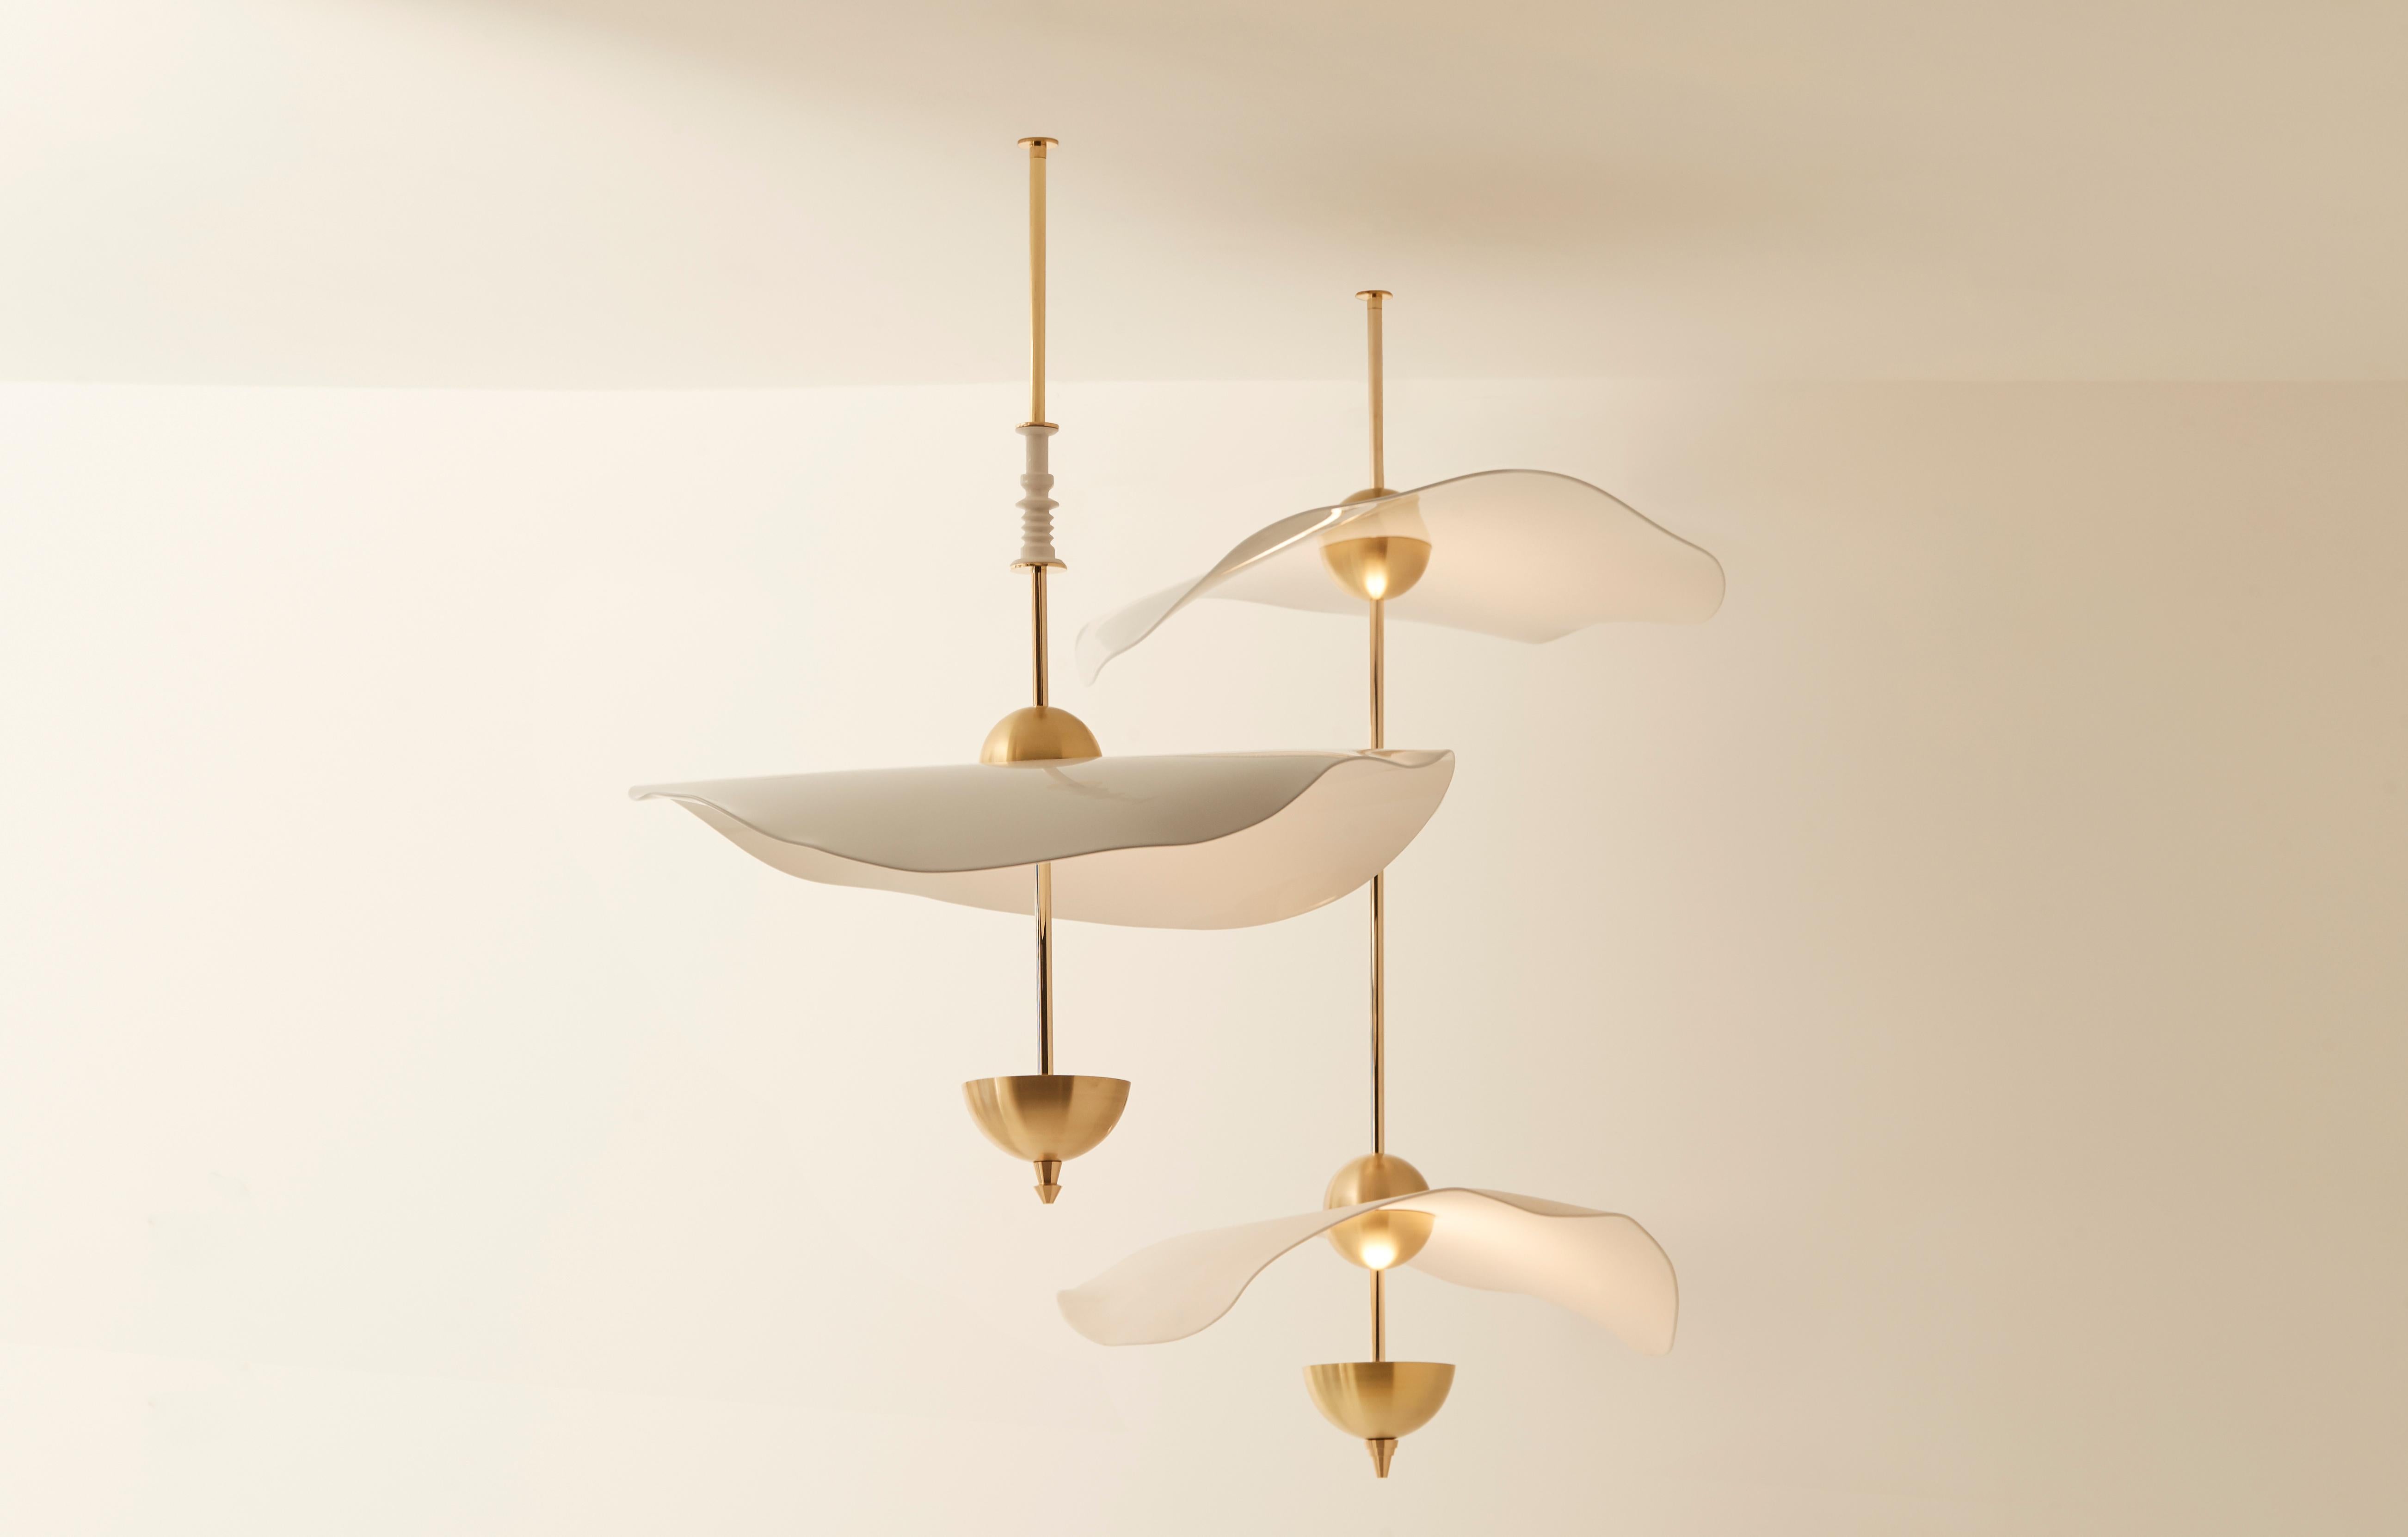 Envolée double pendant light by Mydriaz
Dimensions: W 49 x H 98 x D 60 cm
Materials: Brass
Finishes: Golden-plated polished brass, white nickel finish on polished brass, black nickel finish on polished brass, brass ceramic
18 - 20 kg

Light